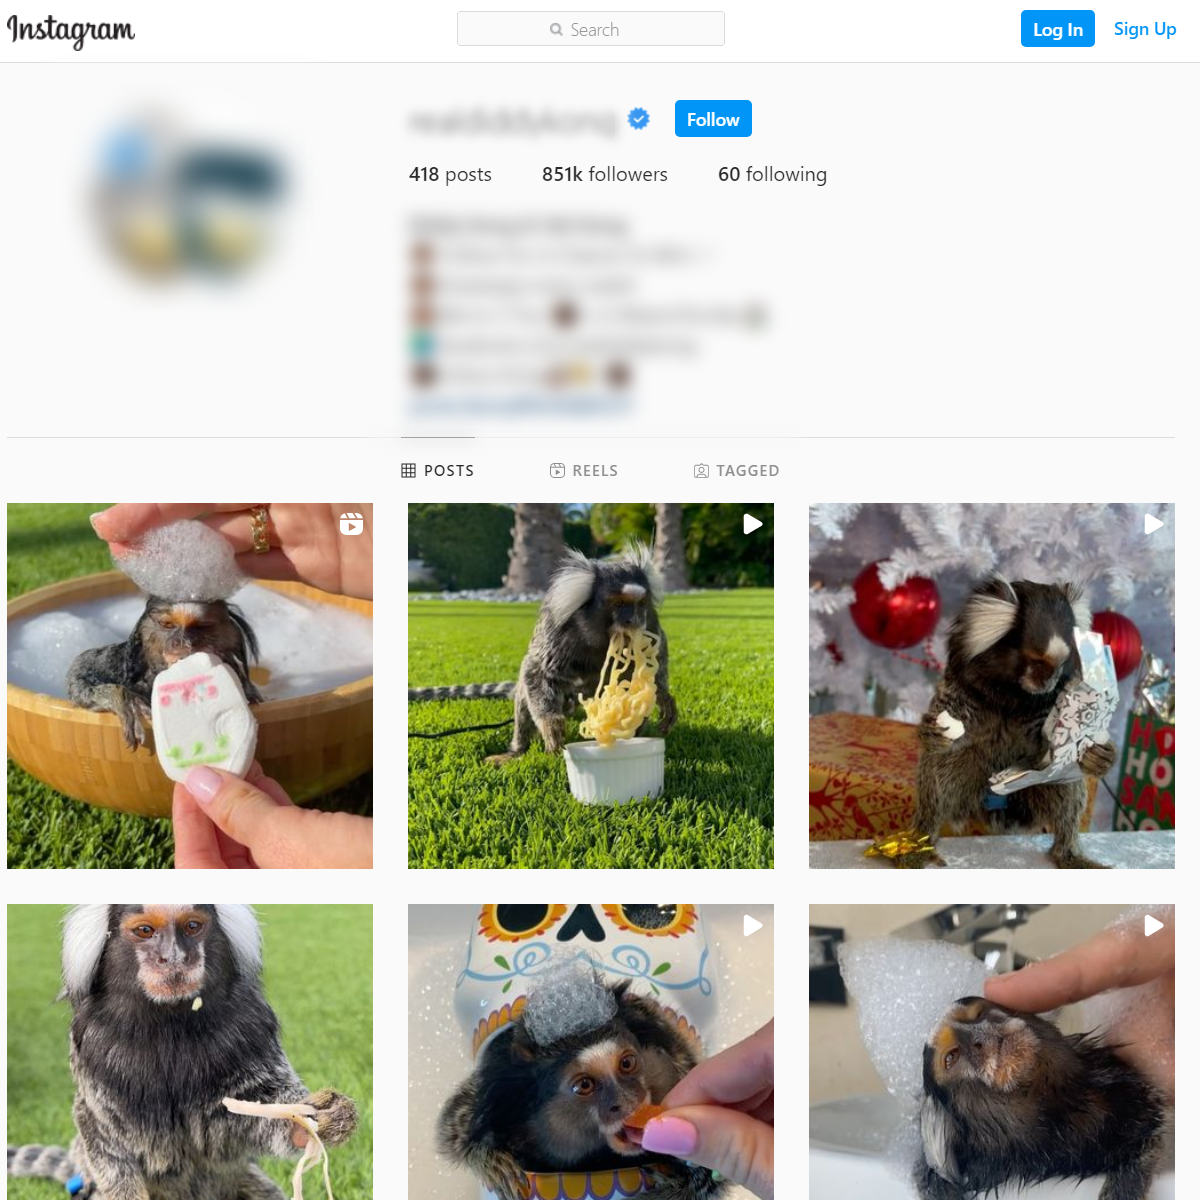 Instagram verified account exploiting marmosets 